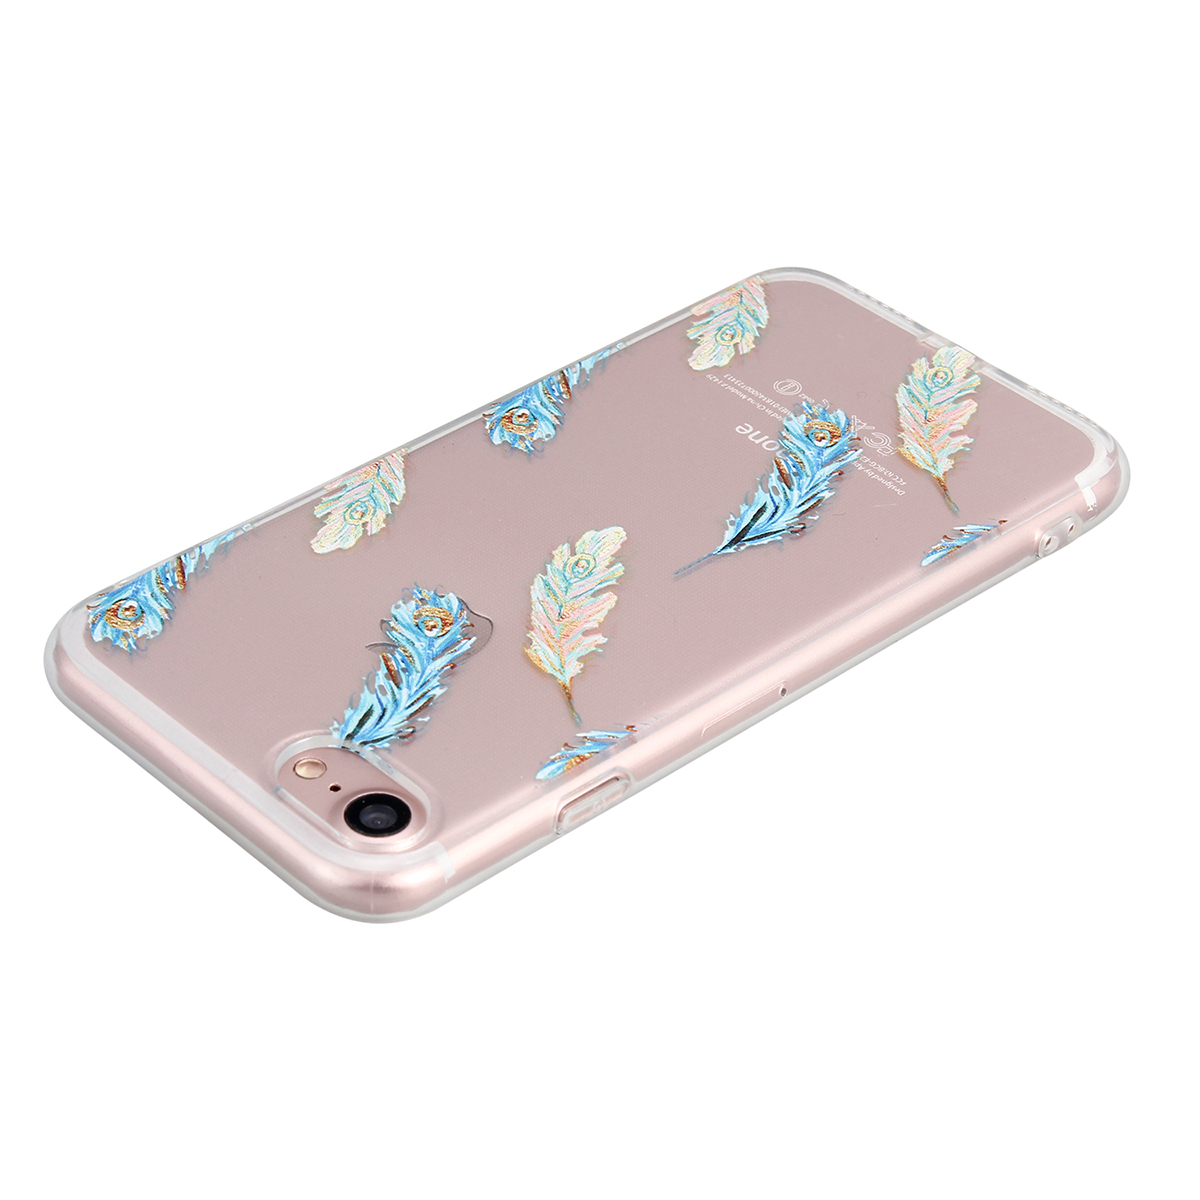 New Slim Soft TPU Transparent Printing Phone Case for iPhone 7 - Peacock Feather